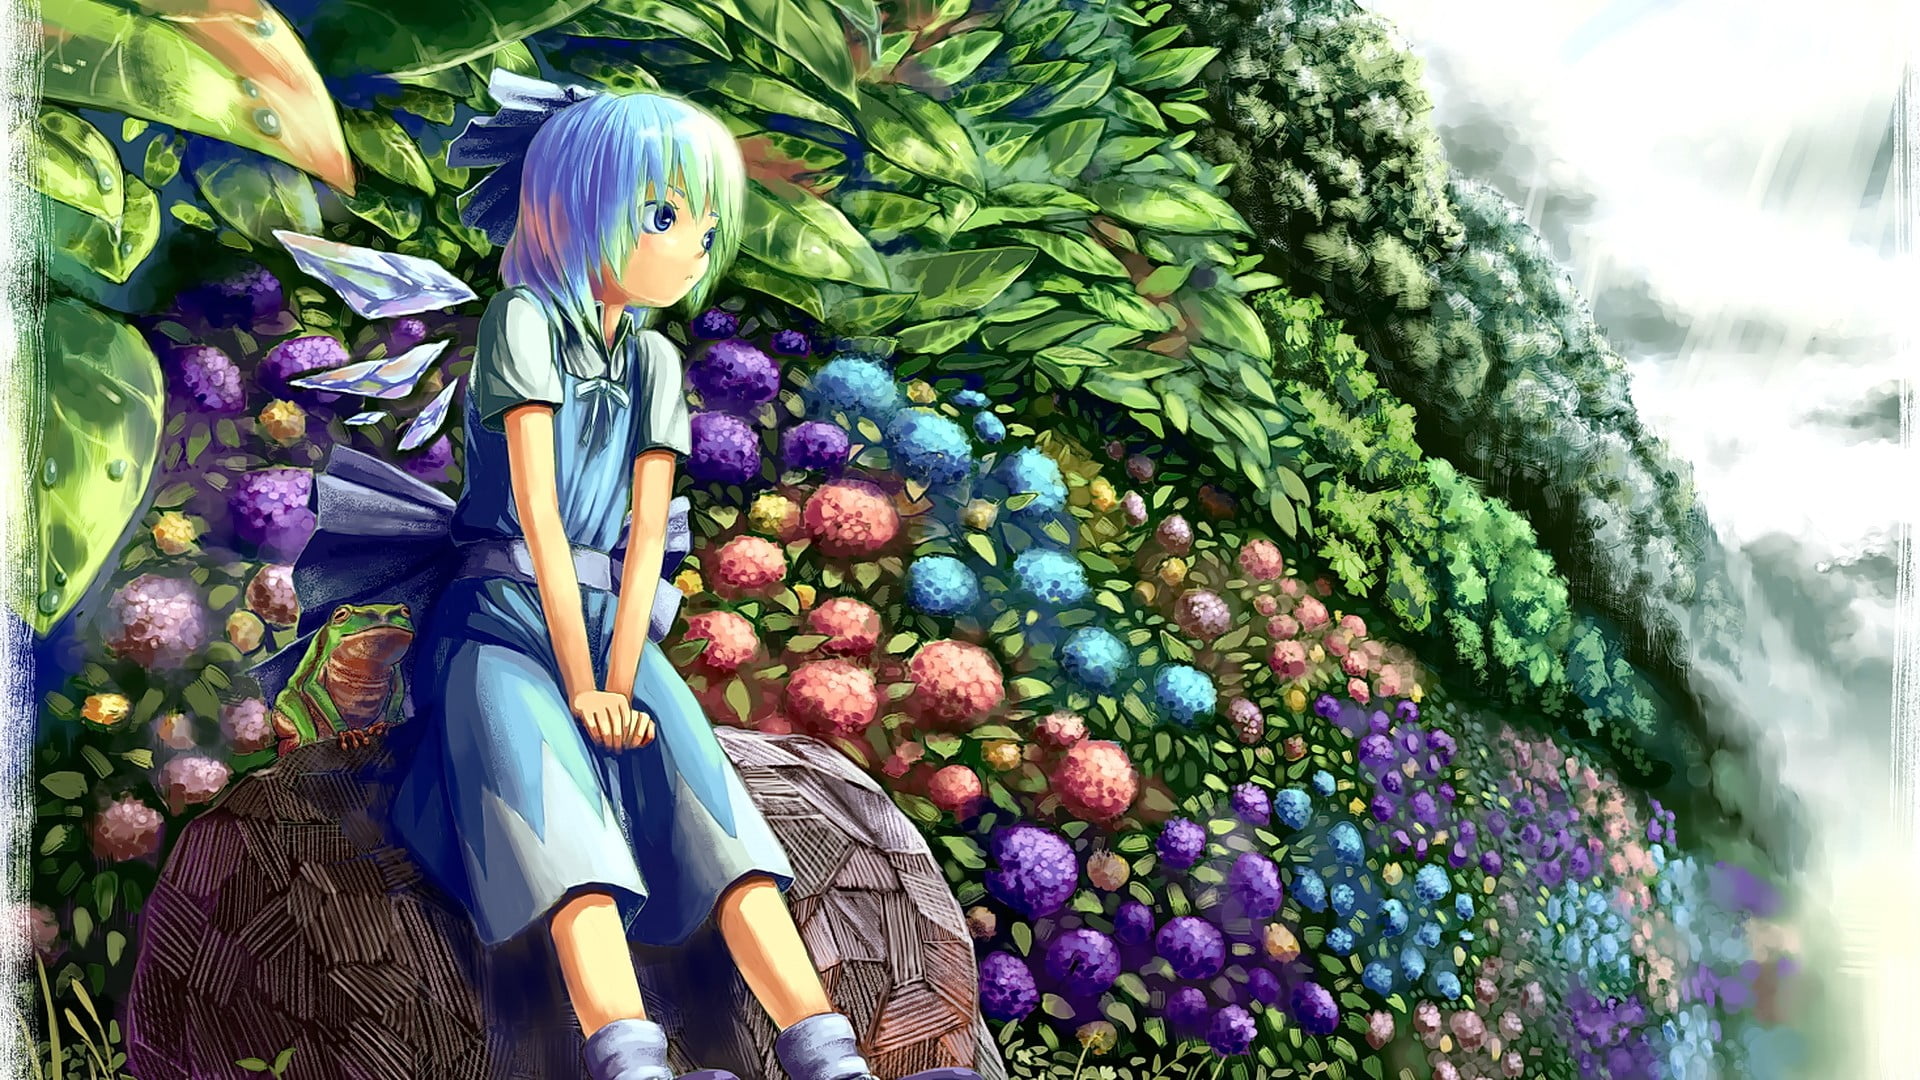 anime, blue hair, looking away, Cirno, flowers, Touhou, multi colored